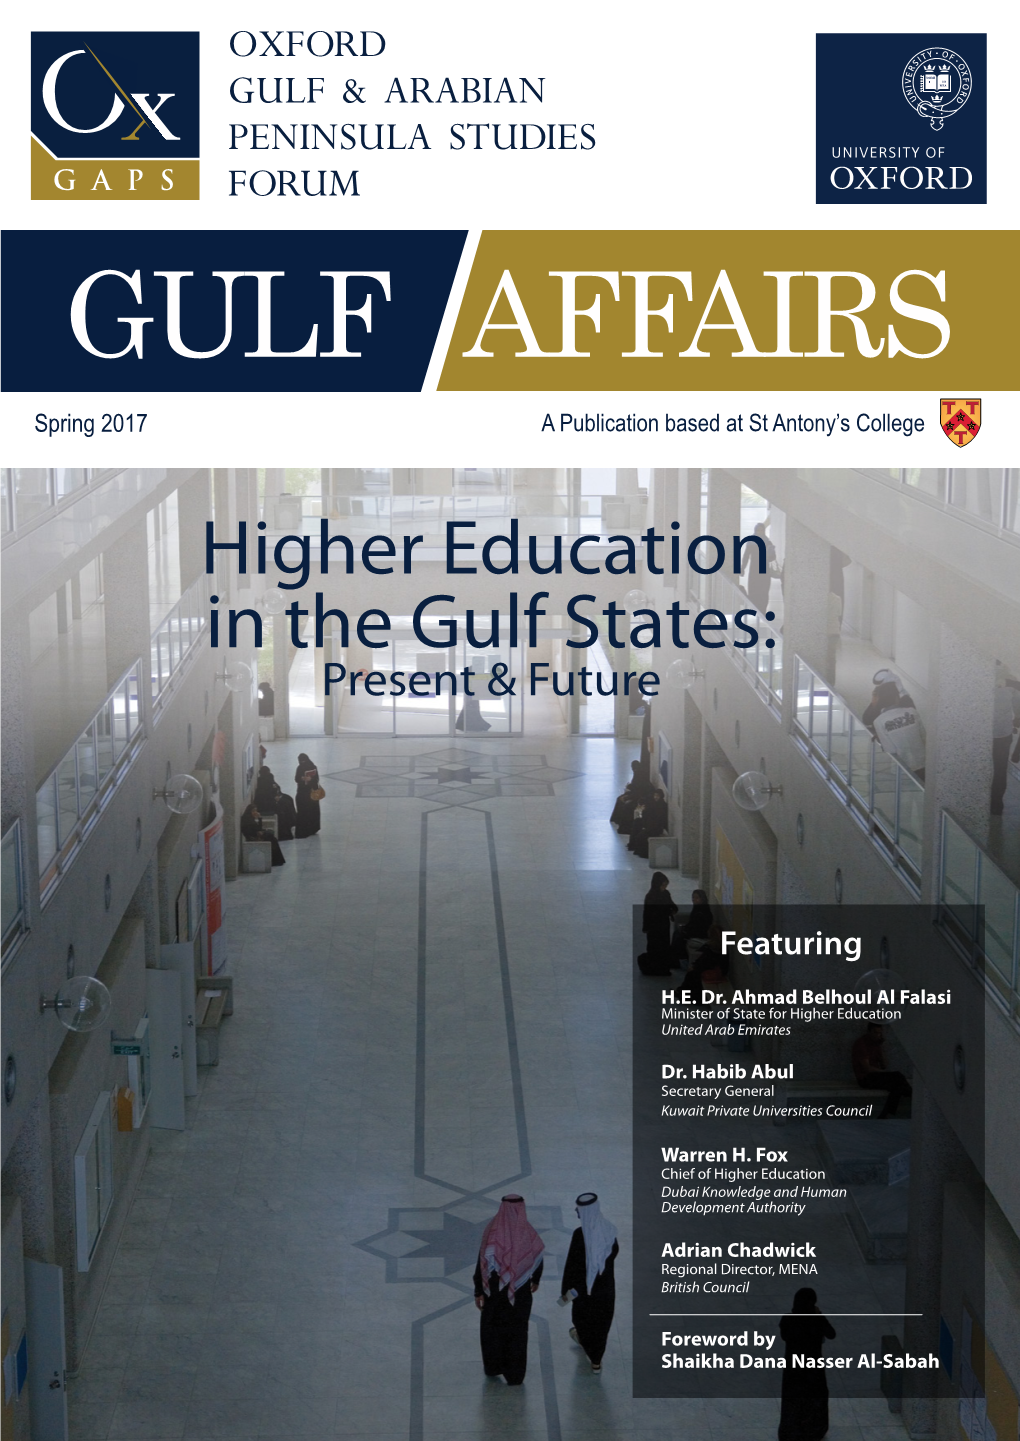 Higher Education in the Gulf States: Present & Future